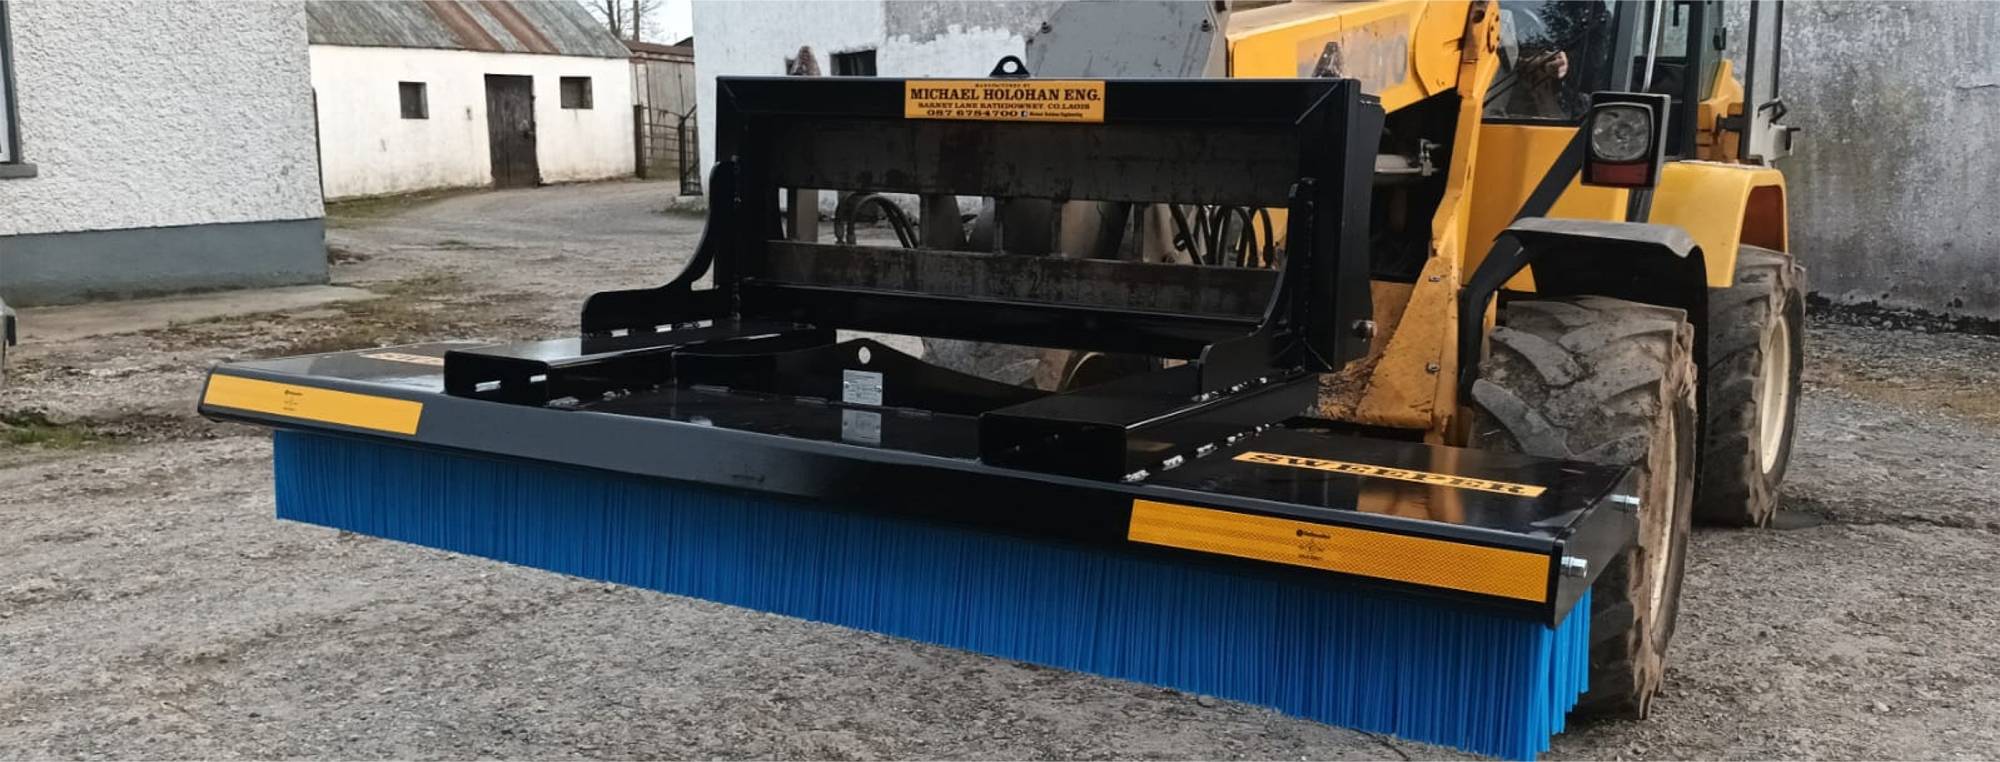 8ft sweeper scraper on euro hitch. Yard brush sweepers manufactured by Michael Holohan Engineering, Laois, Ireland